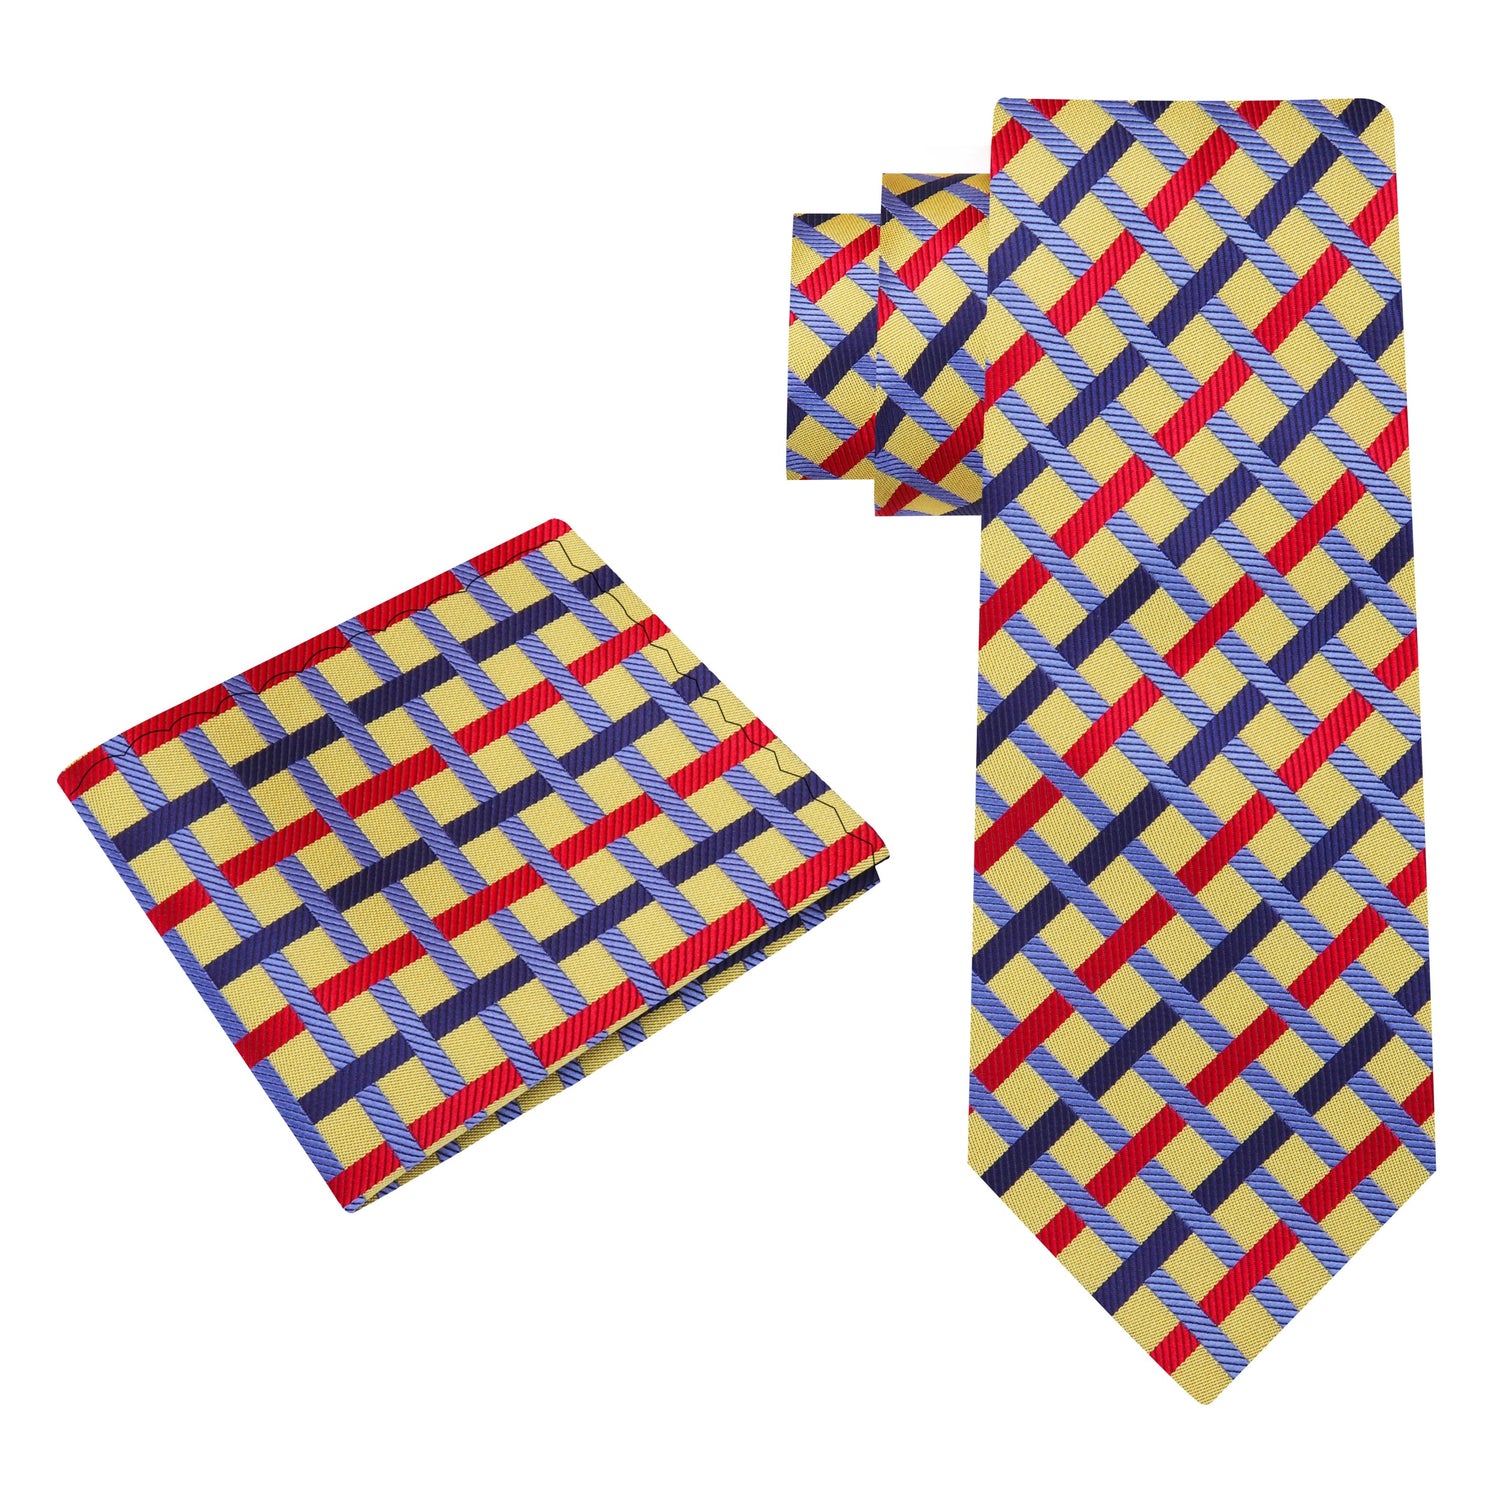 Alt View: A Light Gold, Red, Blue Intersecting Lines Pattern Silk Necktie, Matching Pocket Square